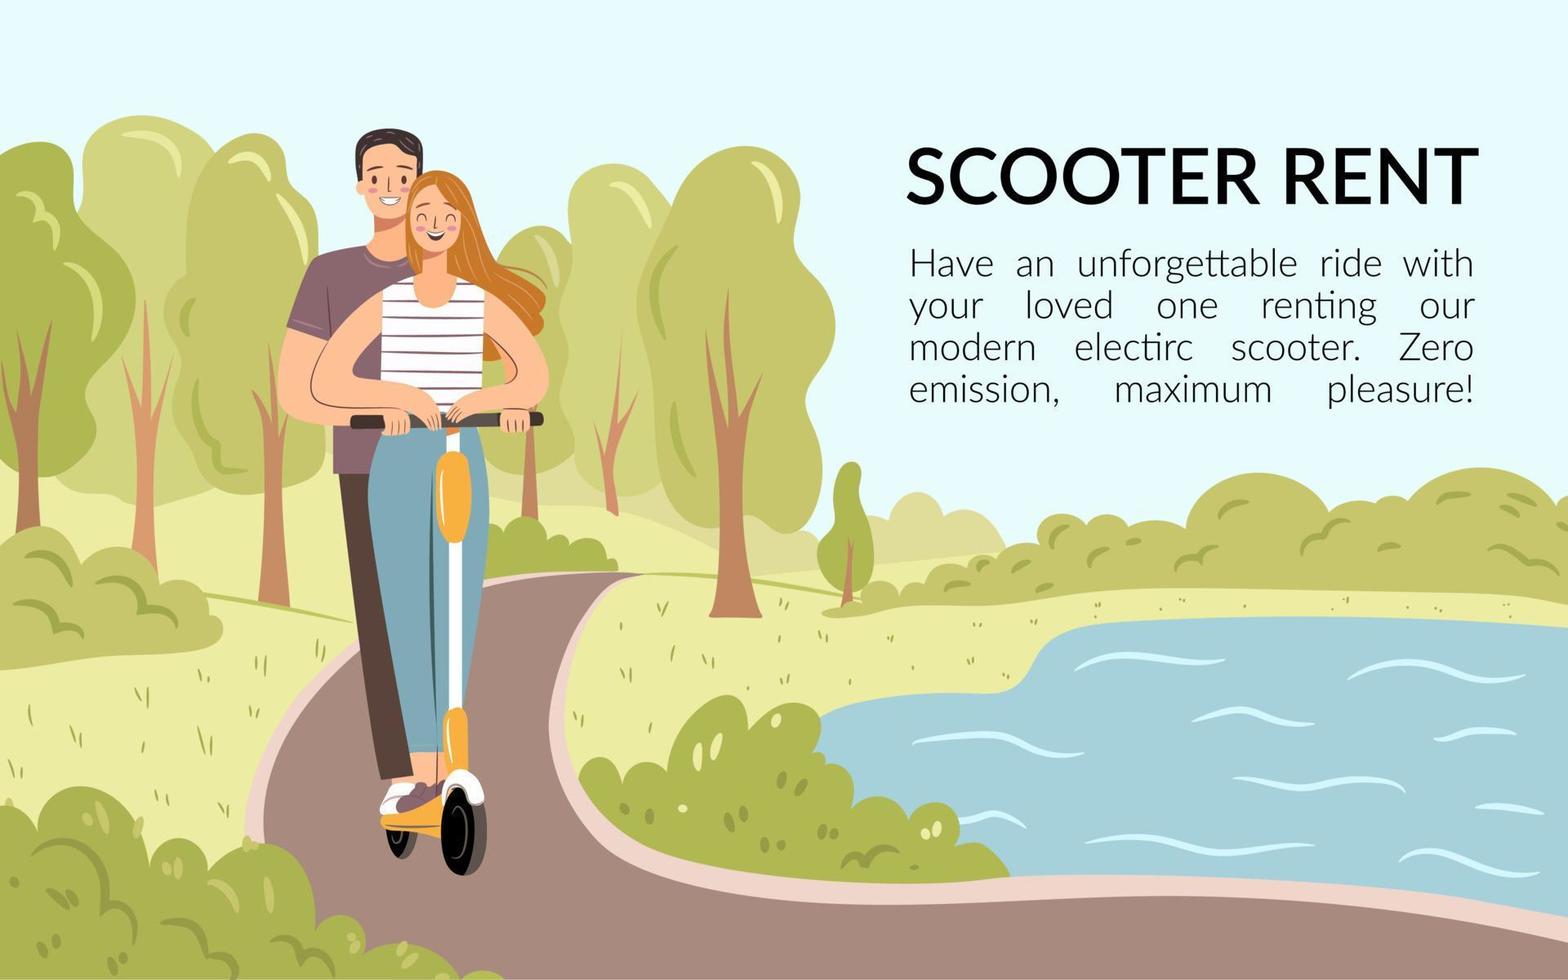 People on scooter in park. Electric scooter rent. Couple riding a scooter in city park. Flat illustration. vector